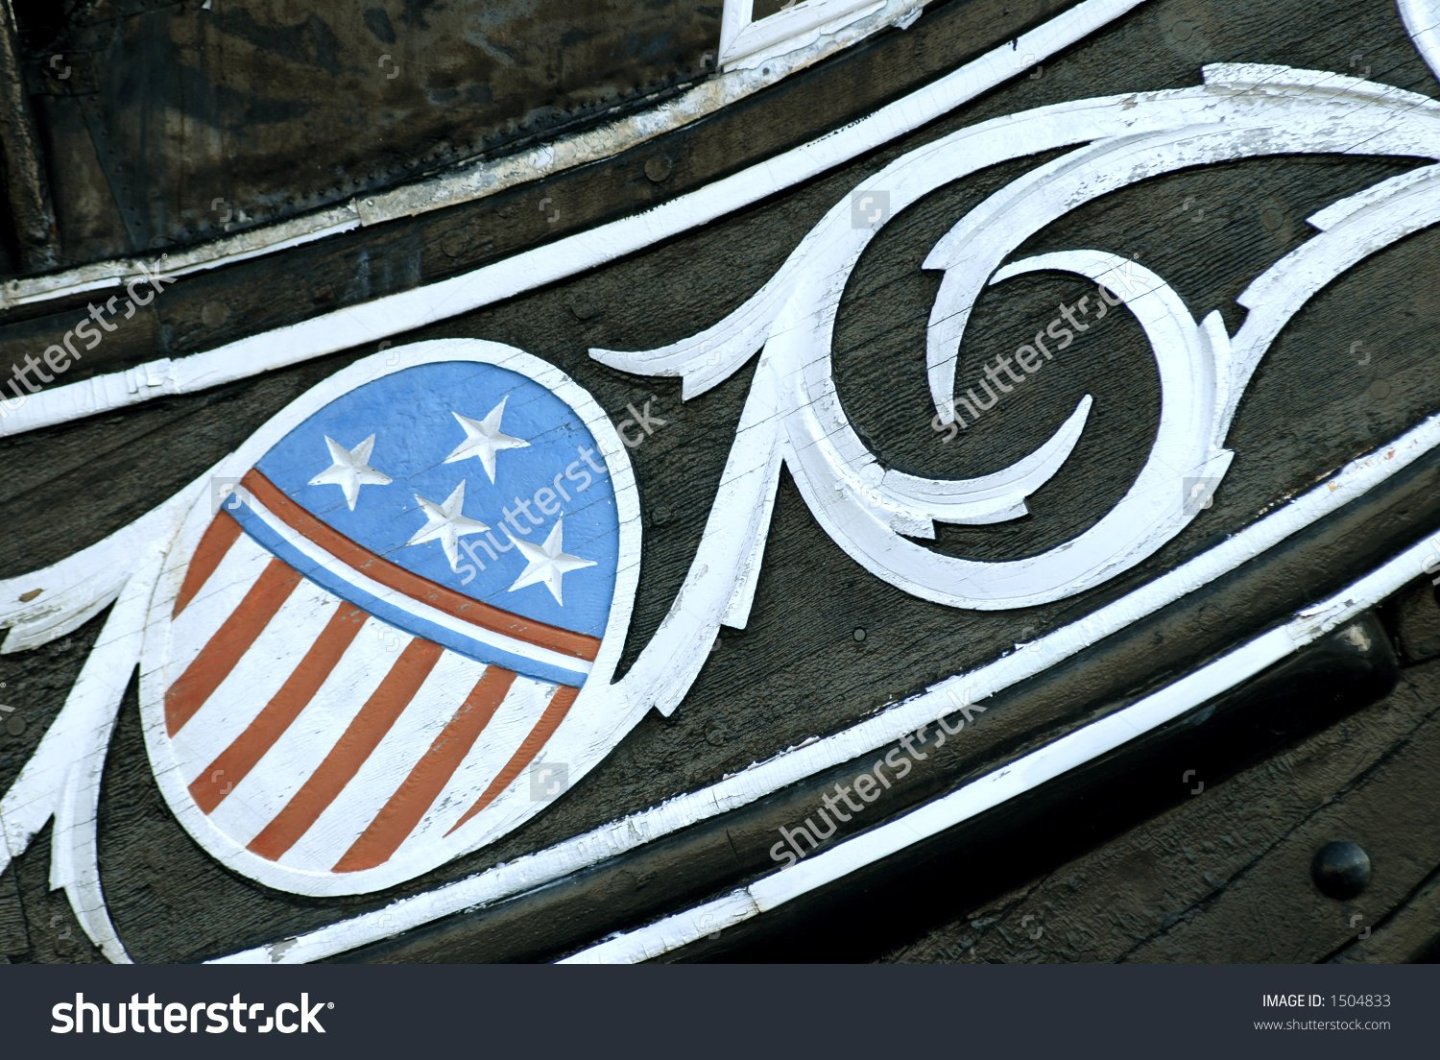 stock-photo-carving-of-the-stars-and-stripes-on-the-bow-of-the-uss-constitution-in-boston-harbor-1504833.jpg